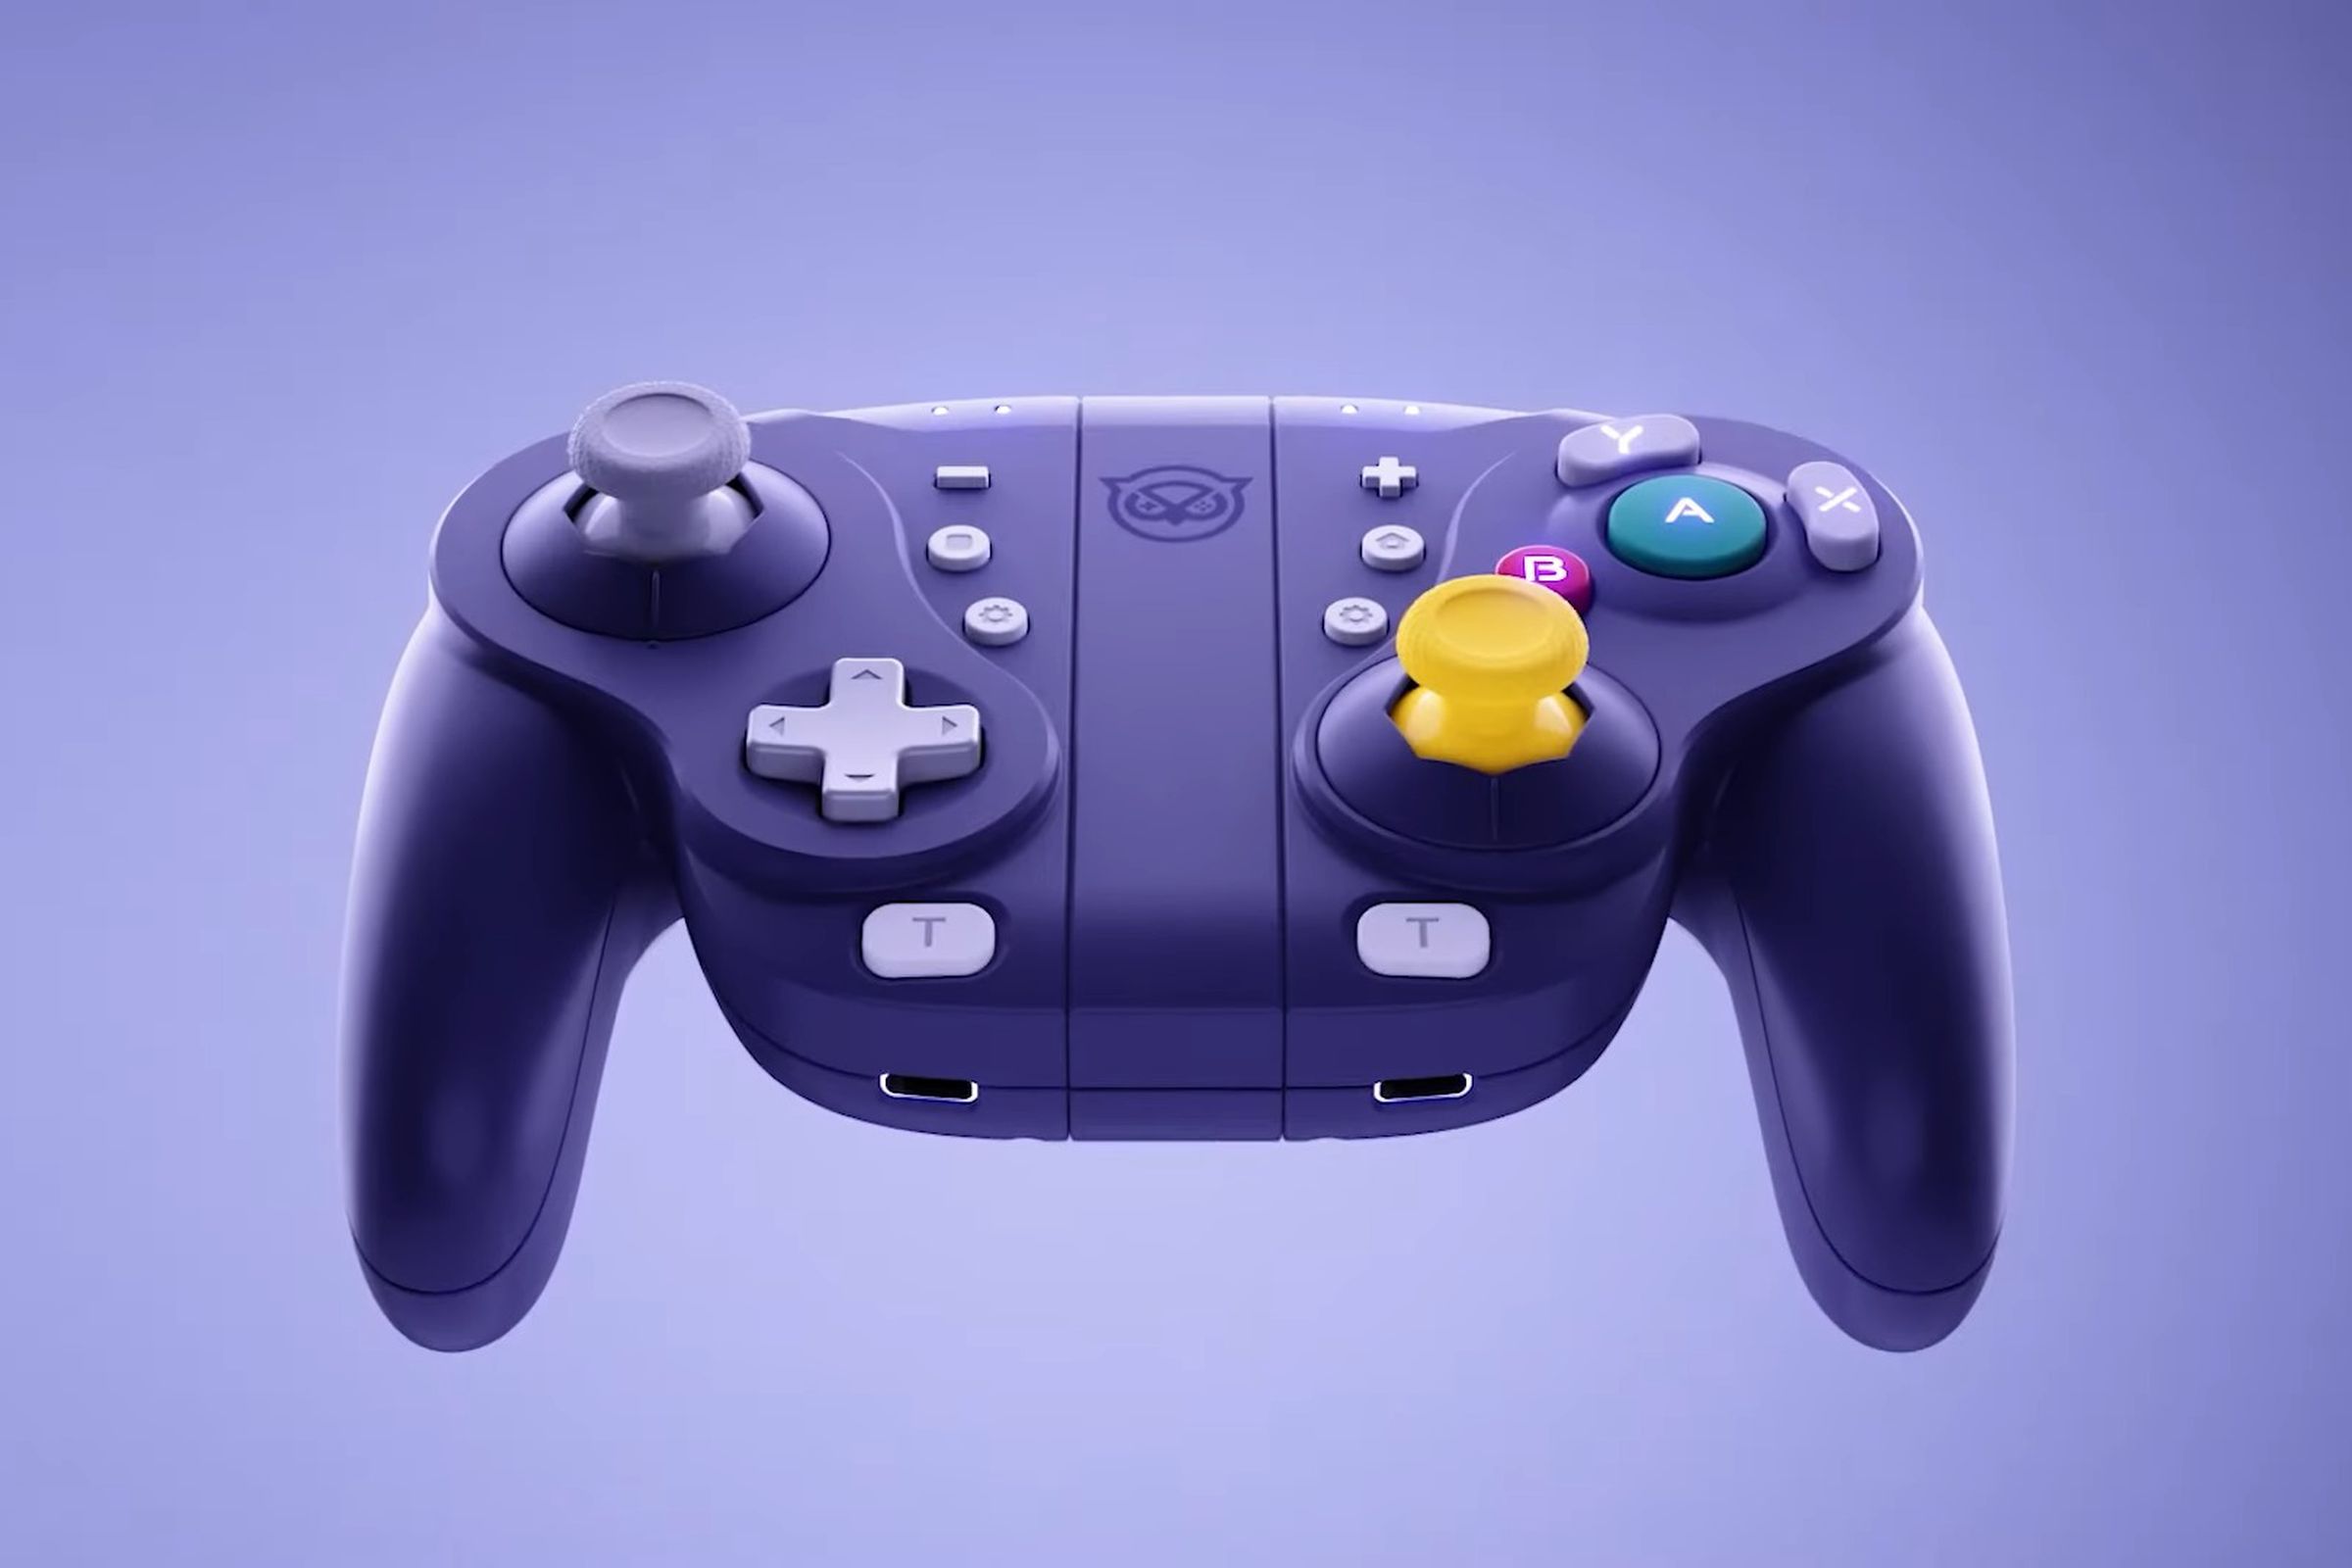 An image of the NYXI Wizard Wireless Joy-pad, a purple Switch controller in a GameCube configuration.